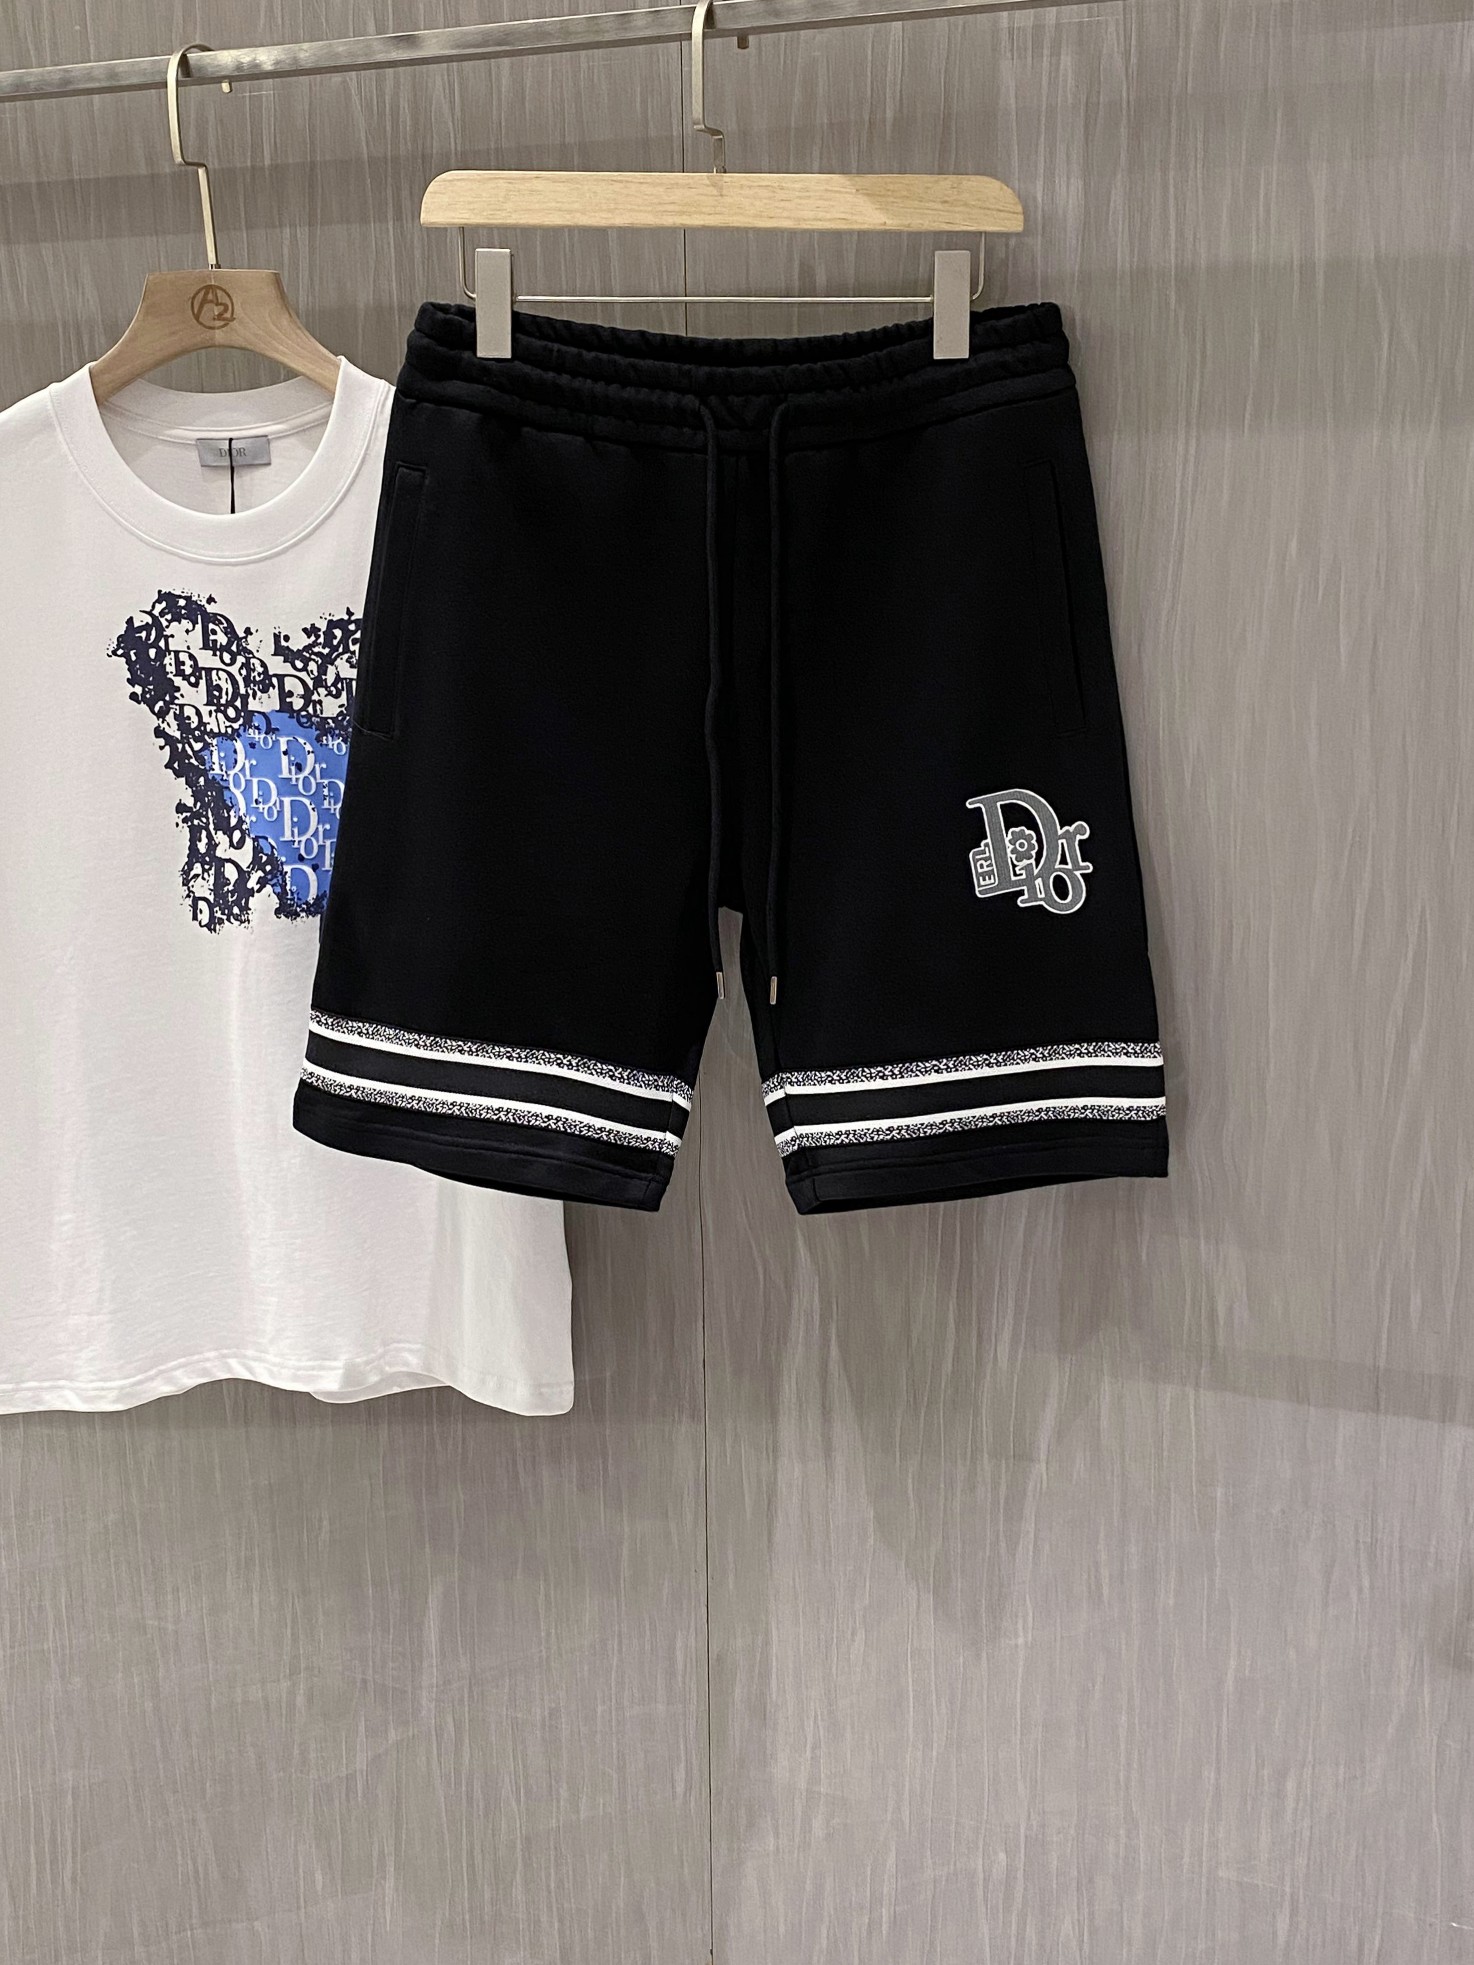 Dior Clothing Shorts Embroidery Cotton Spring/Summer Collection Fashion Sweatpants